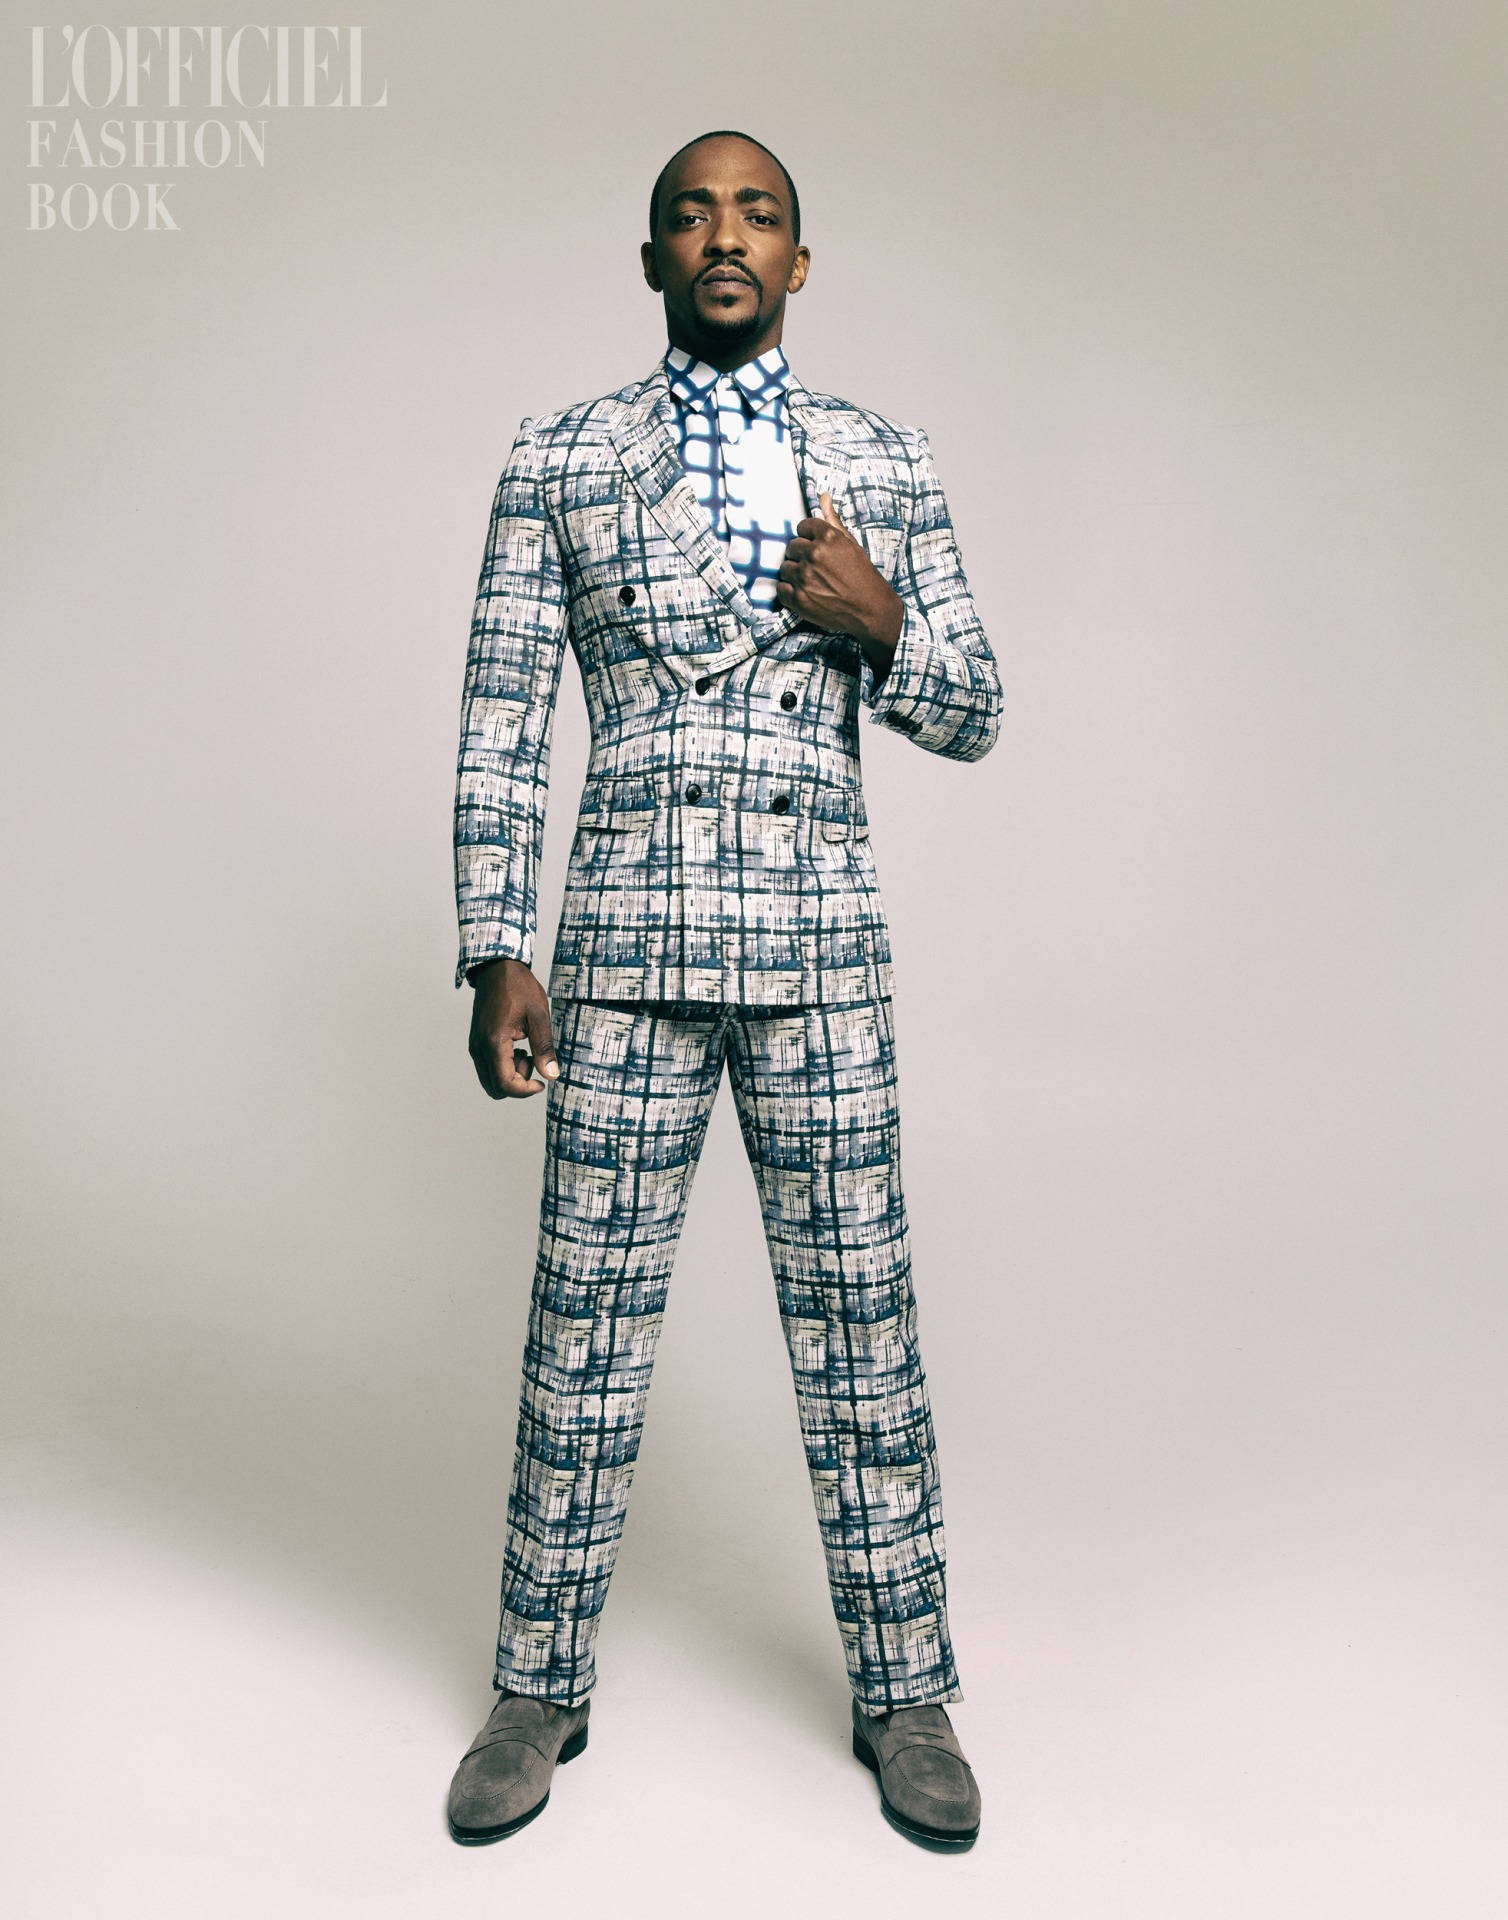 Anthony Mackie For L'officiel Fashion